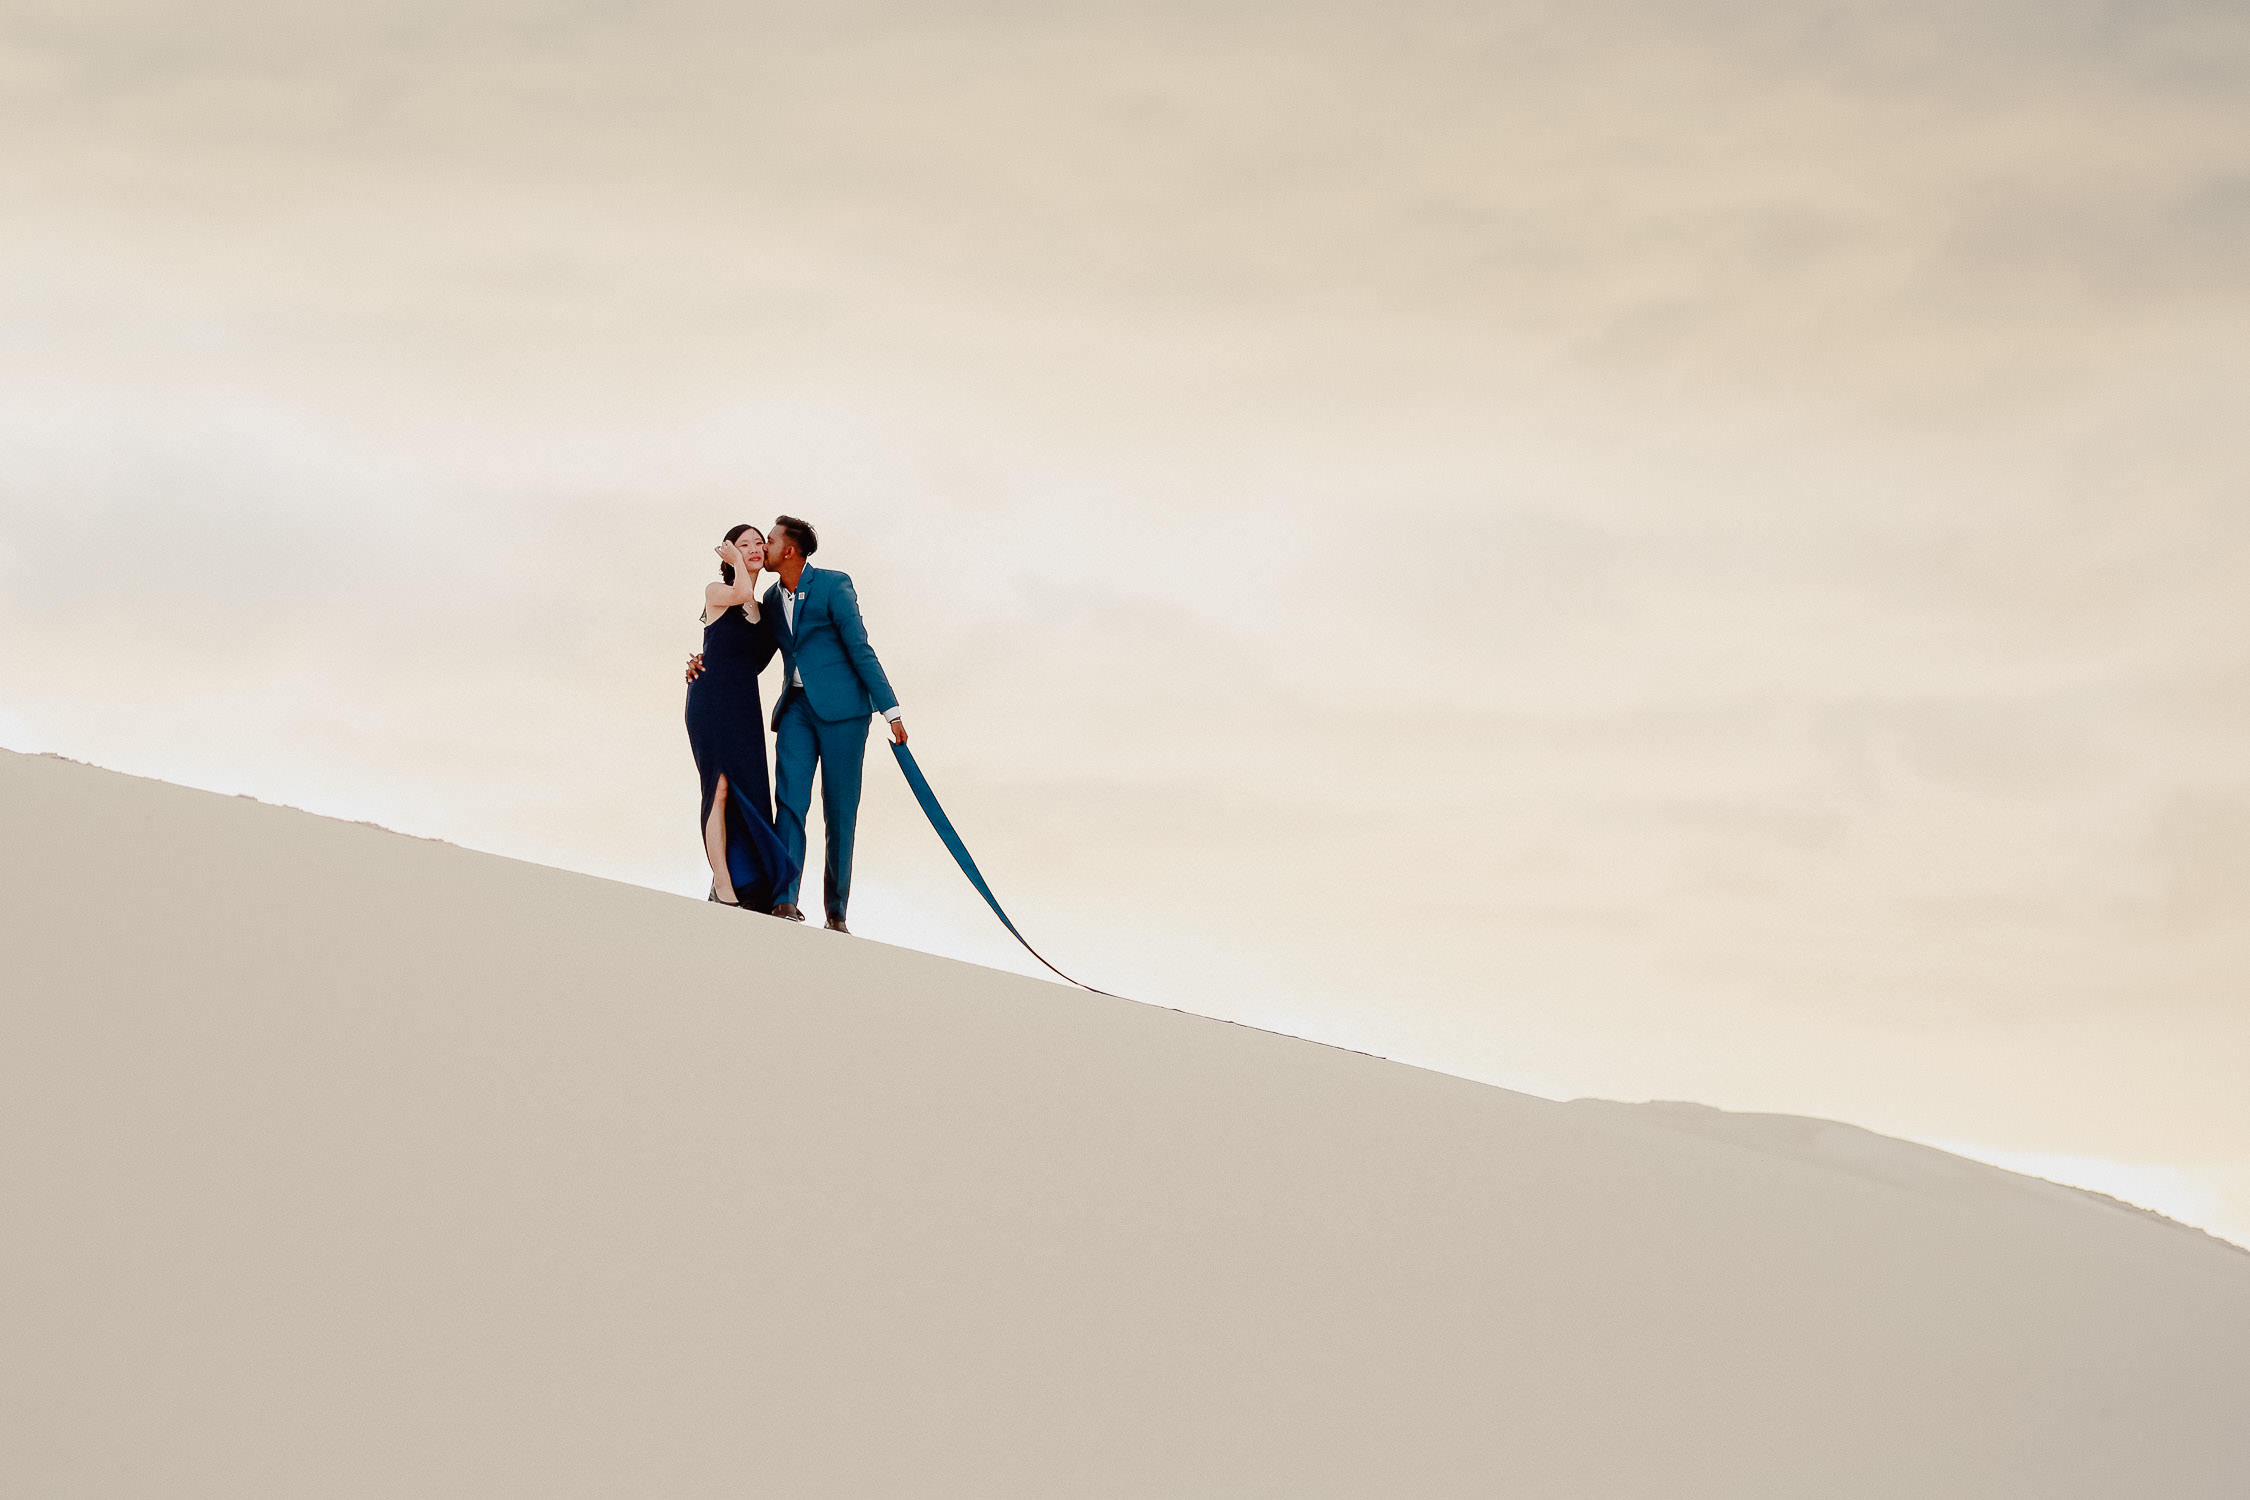 Perth pre-wedding at Lancelin sand dunes, Pinnacles Desert and forest by Naz on OneThreeOneFour 0